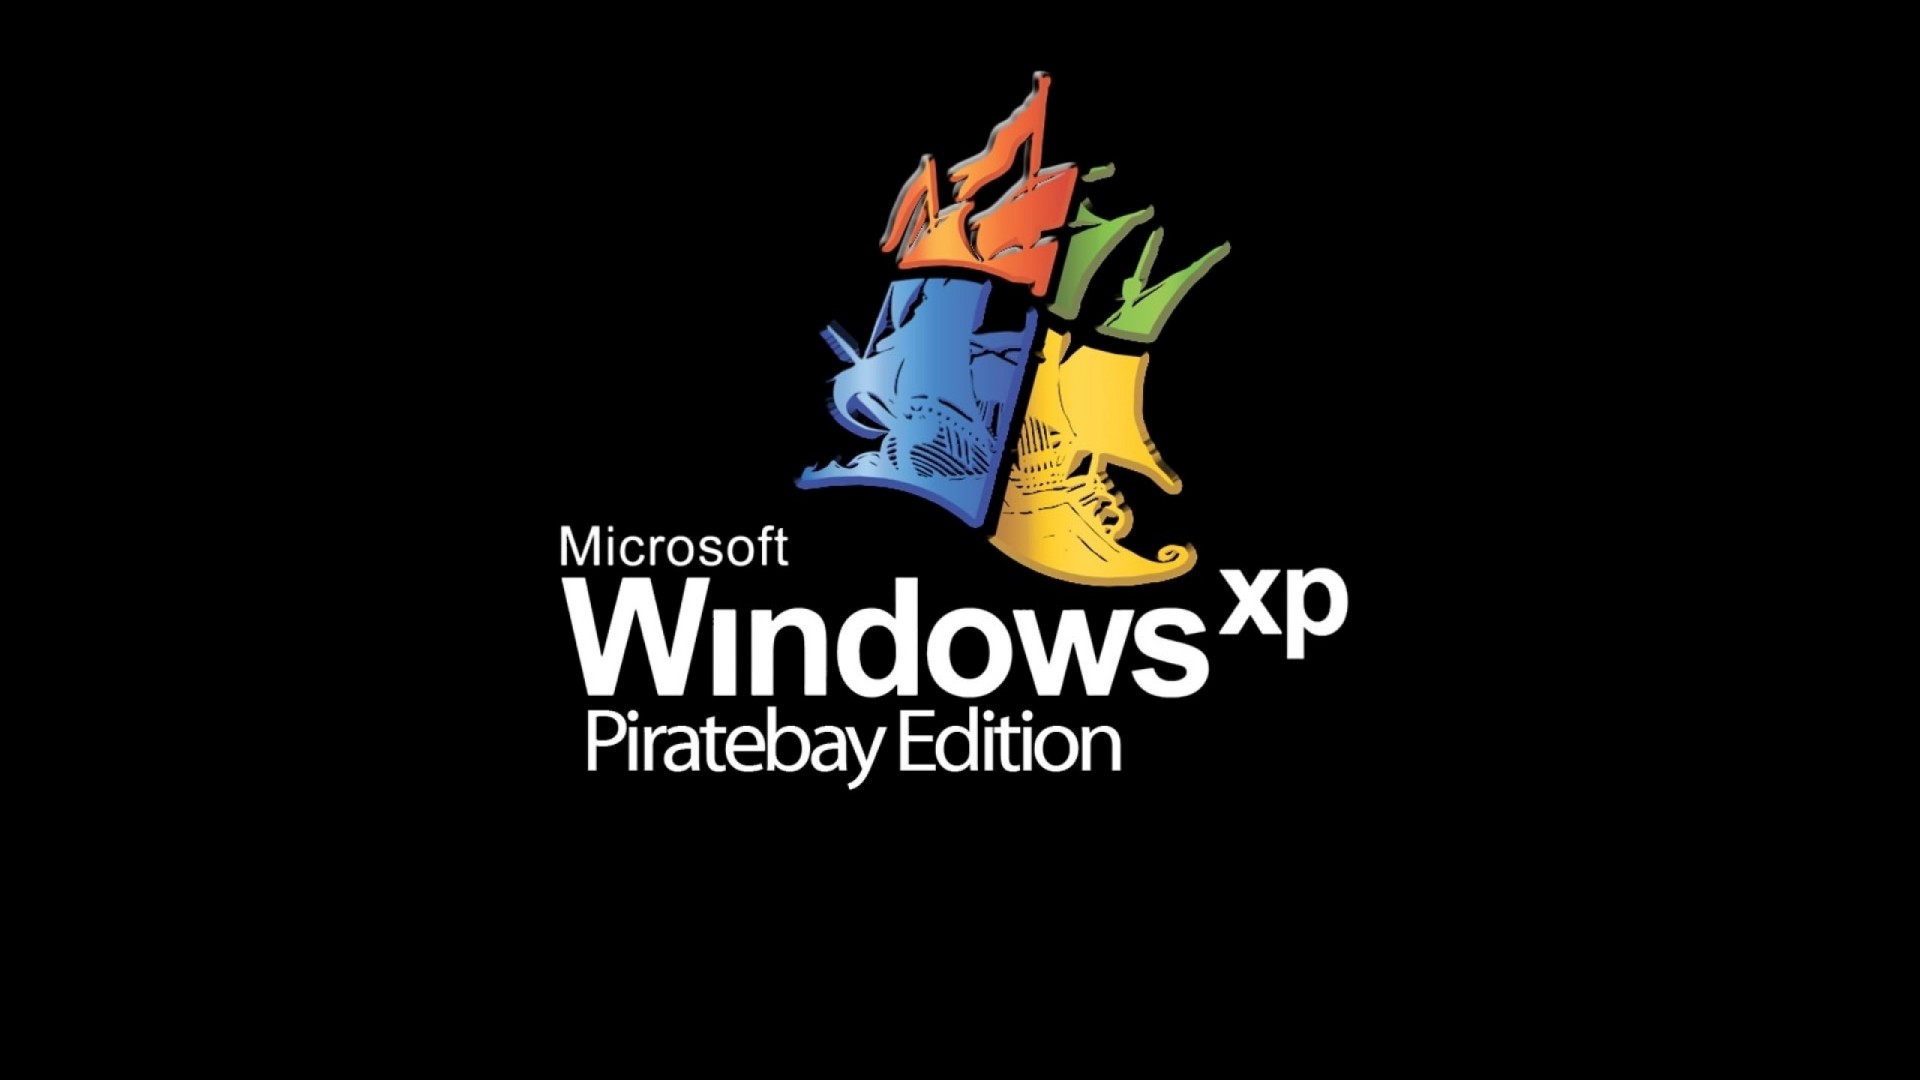 Pirated Windows Xp Logo Funny HD Wallpaper With Resolutions